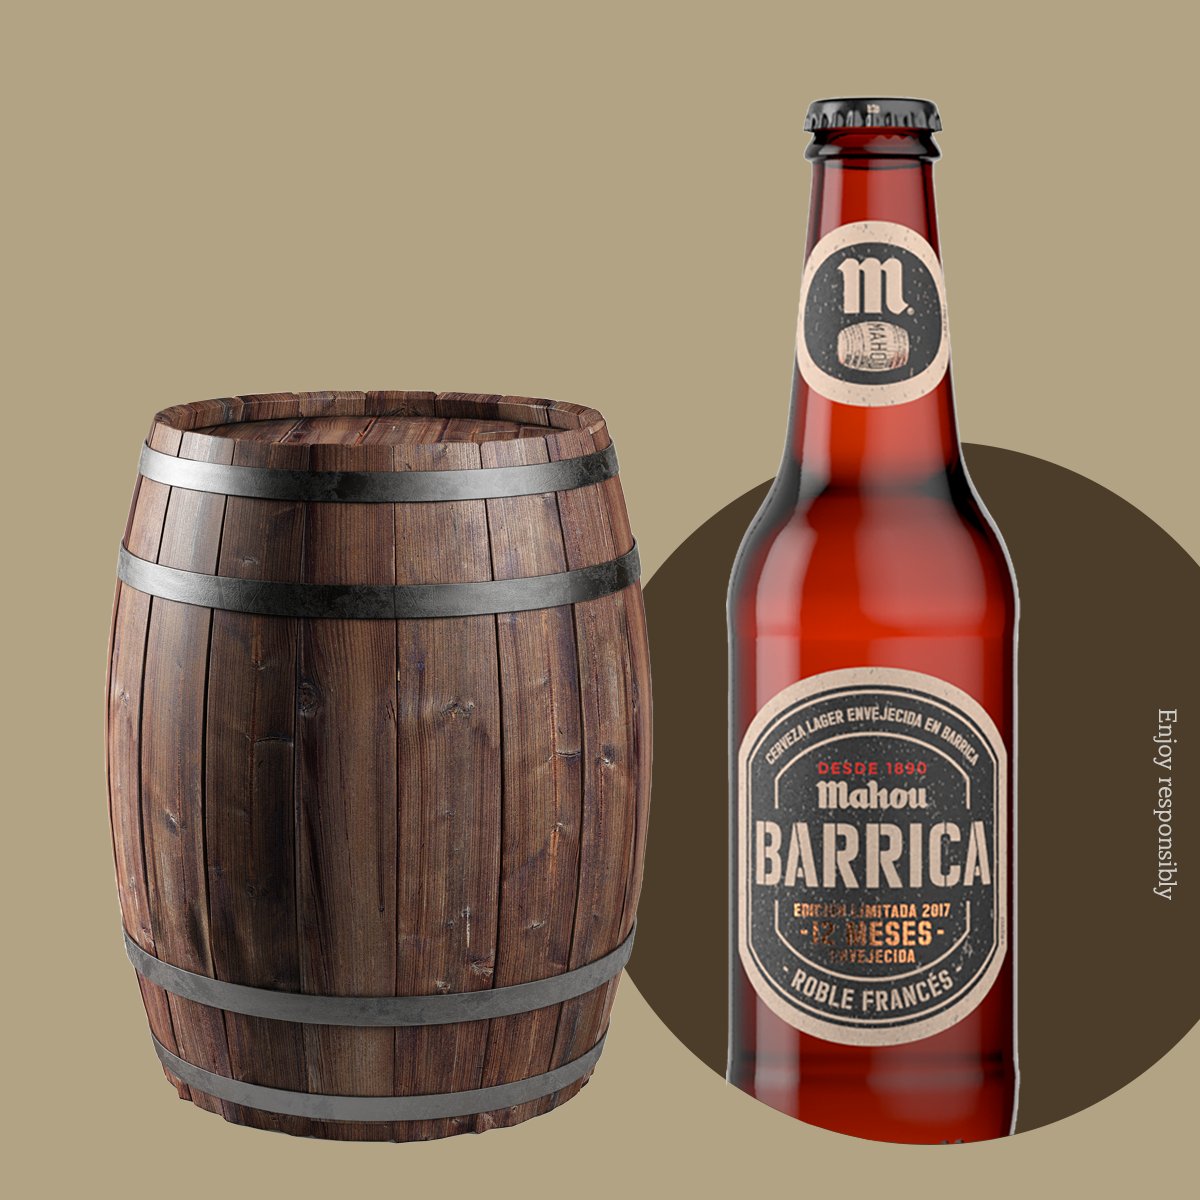 Our Barrica beer, made in oak barrels and with its intense golden color and dense foam, is a dream for every brewmaster with a love for traditional flavors such as almonds or cereal. Tag someone who you know would love this beer!